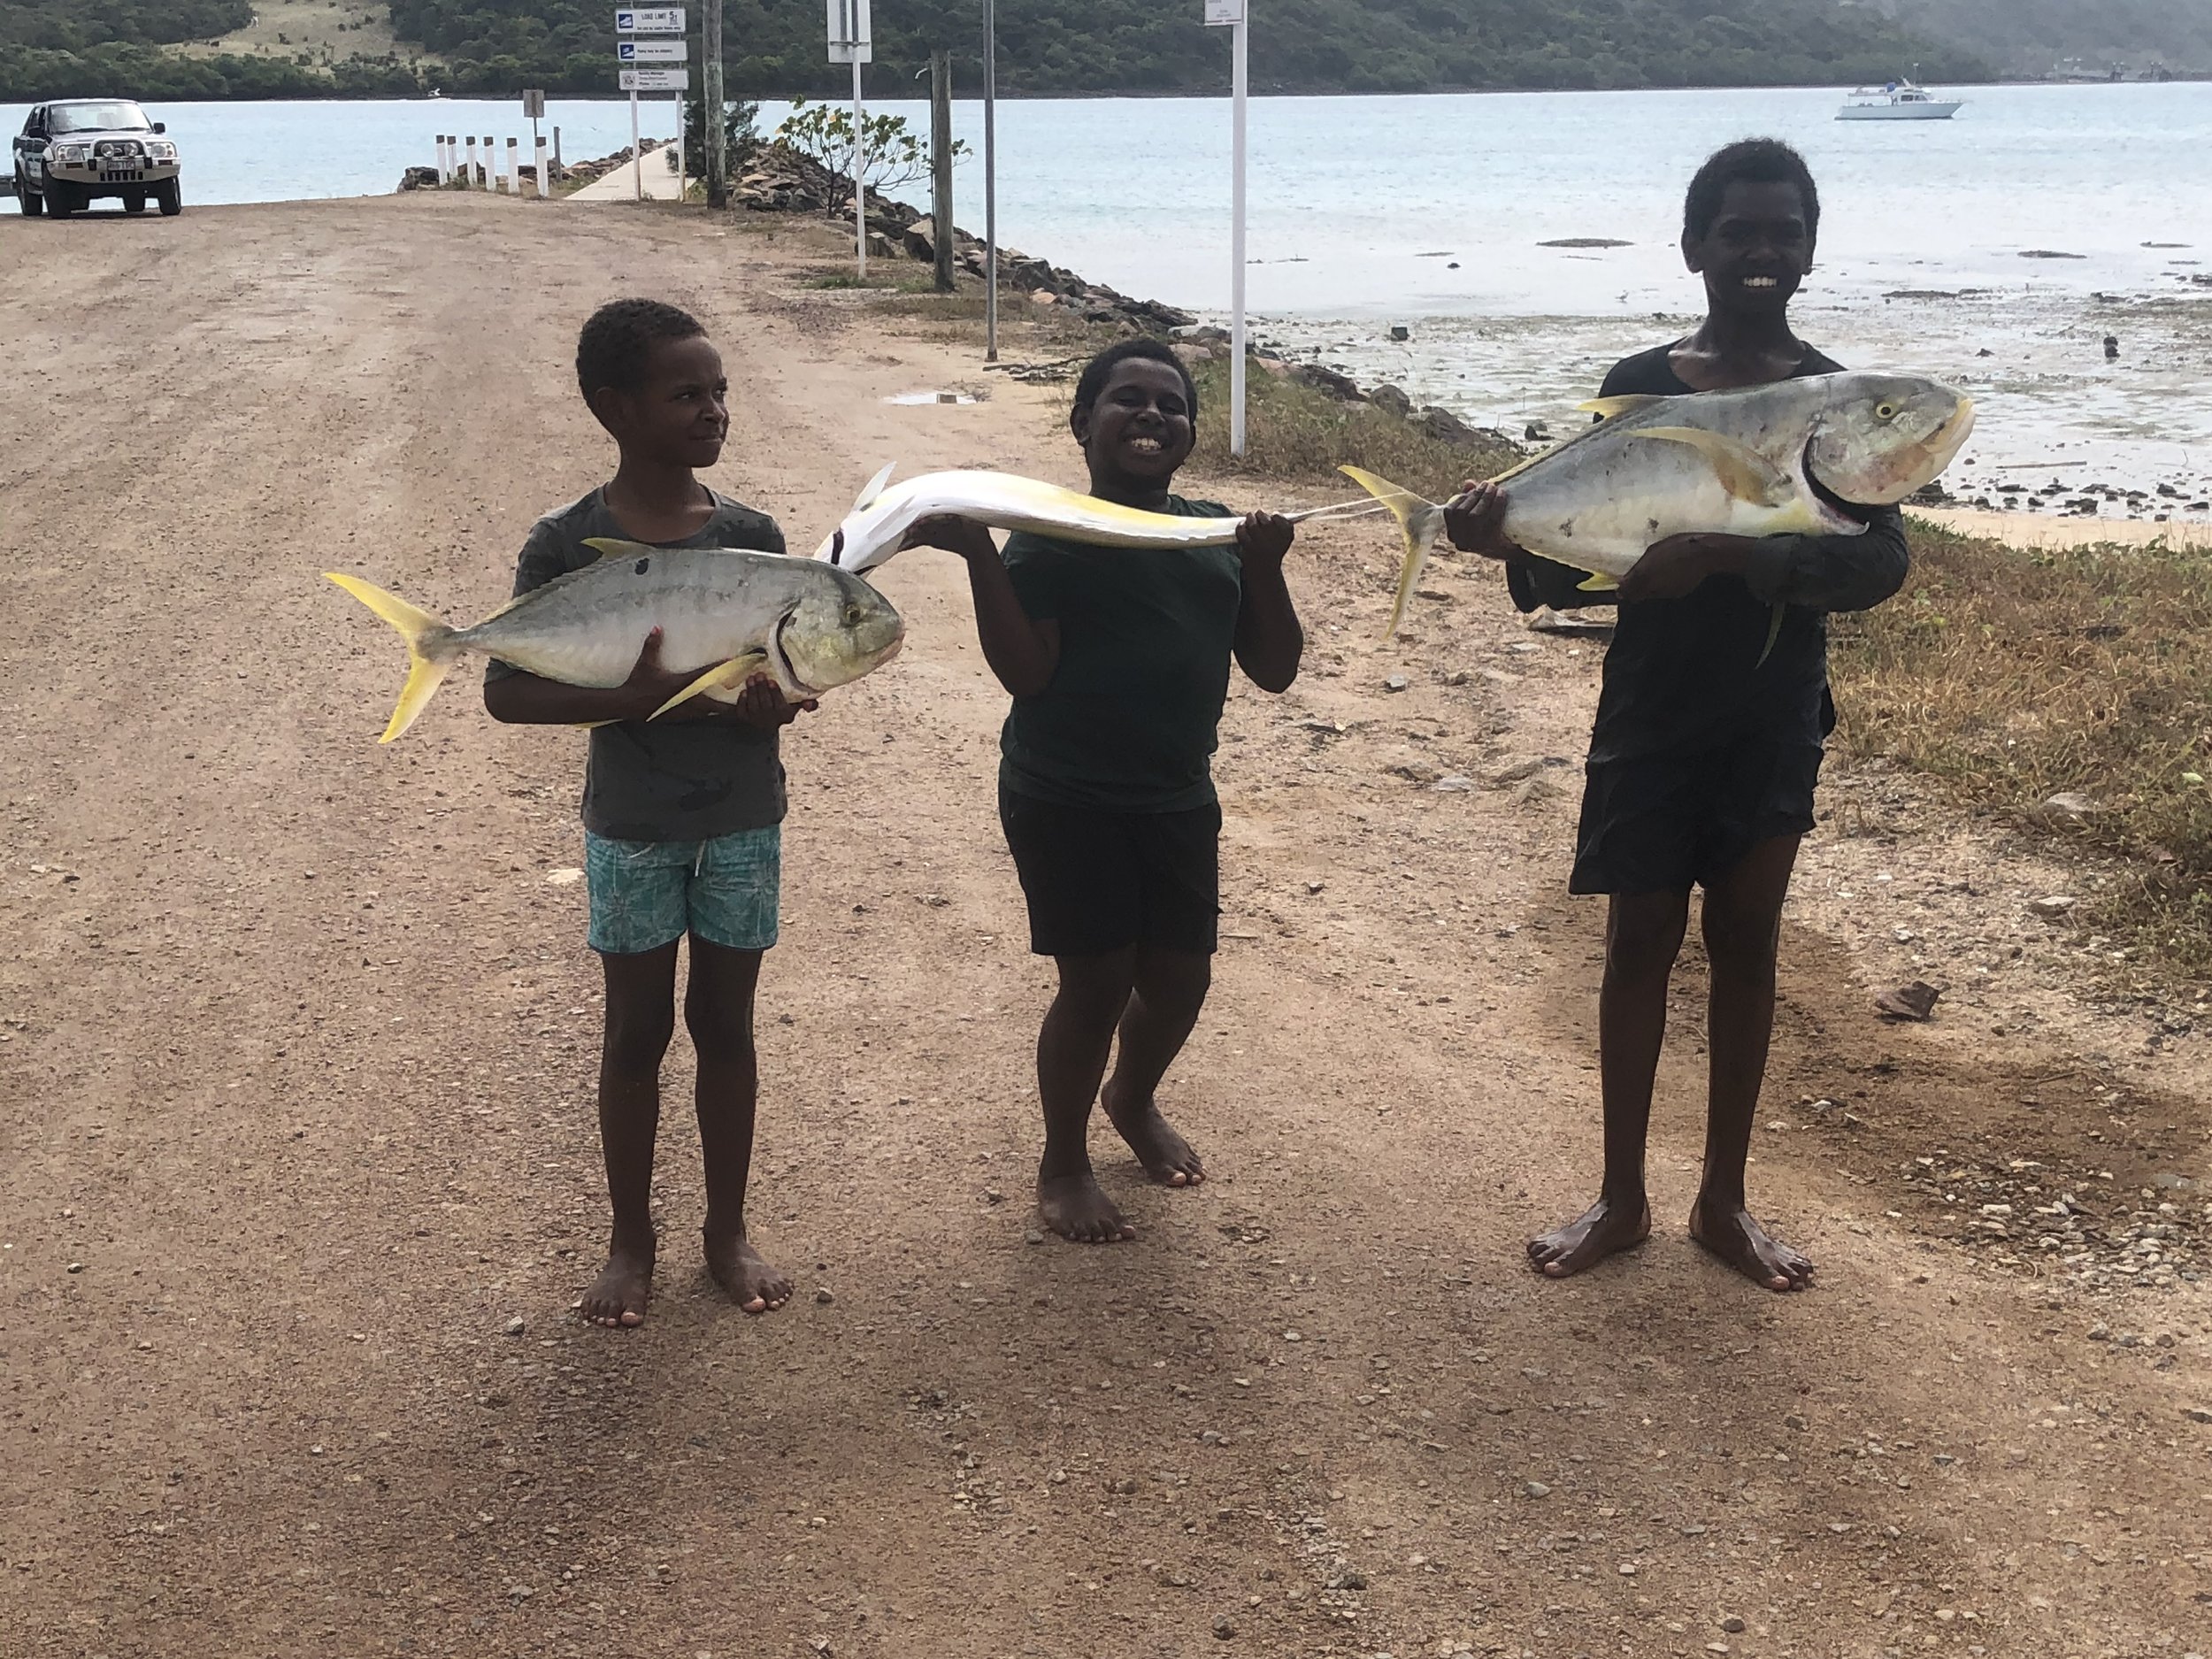 Proud local kids with their catch